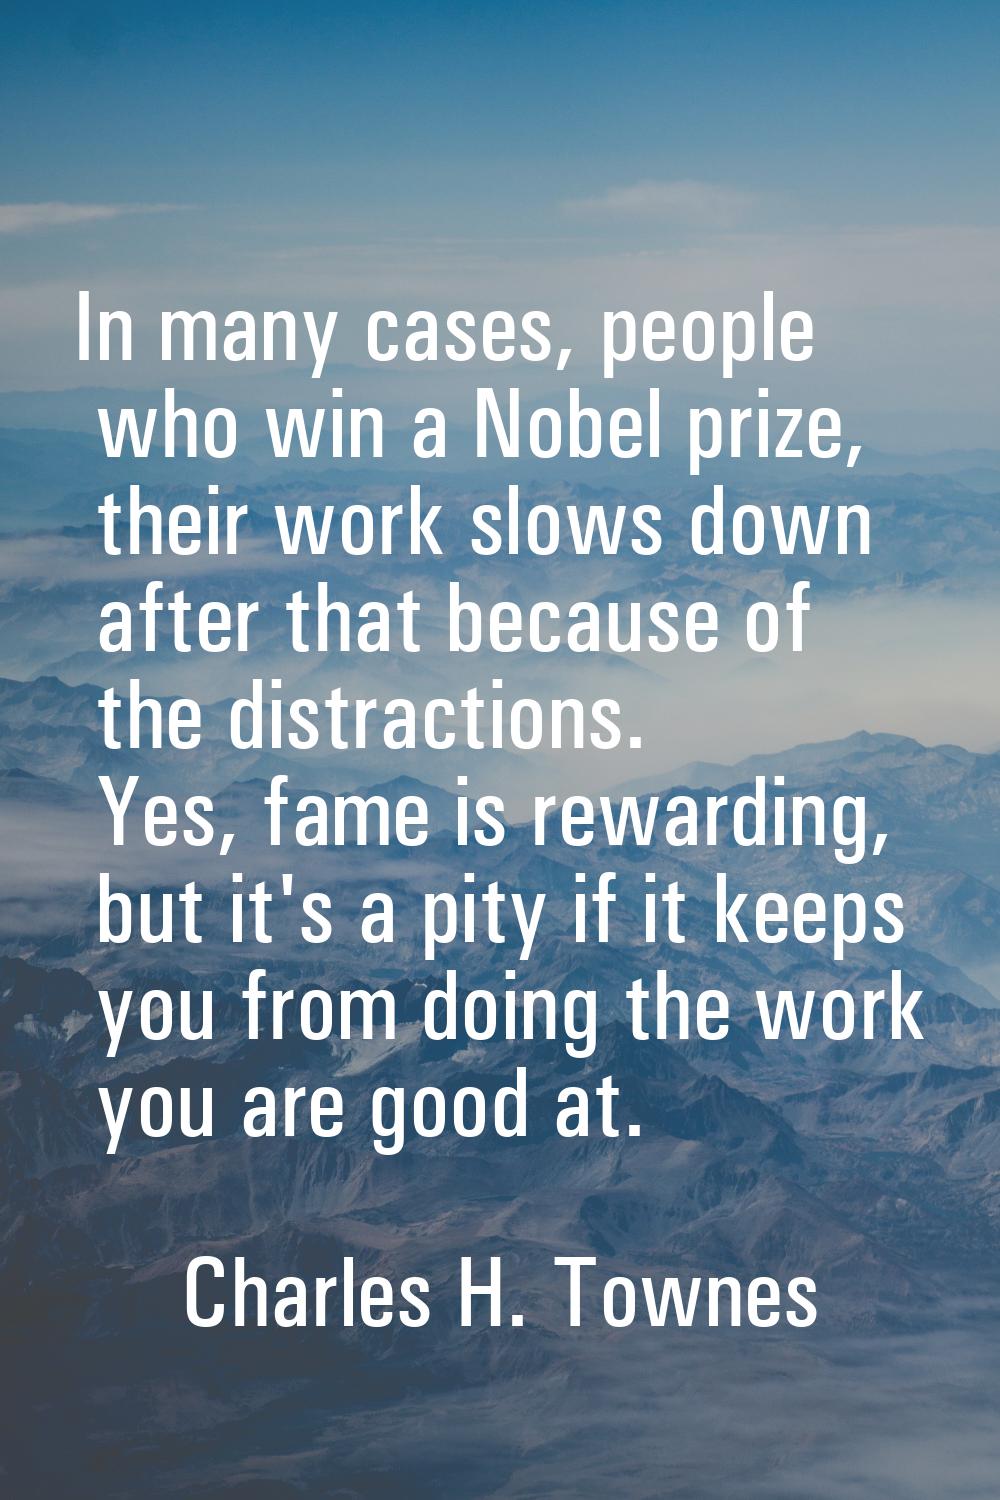 In many cases, people who win a Nobel prize, their work slows down after that because of the distra